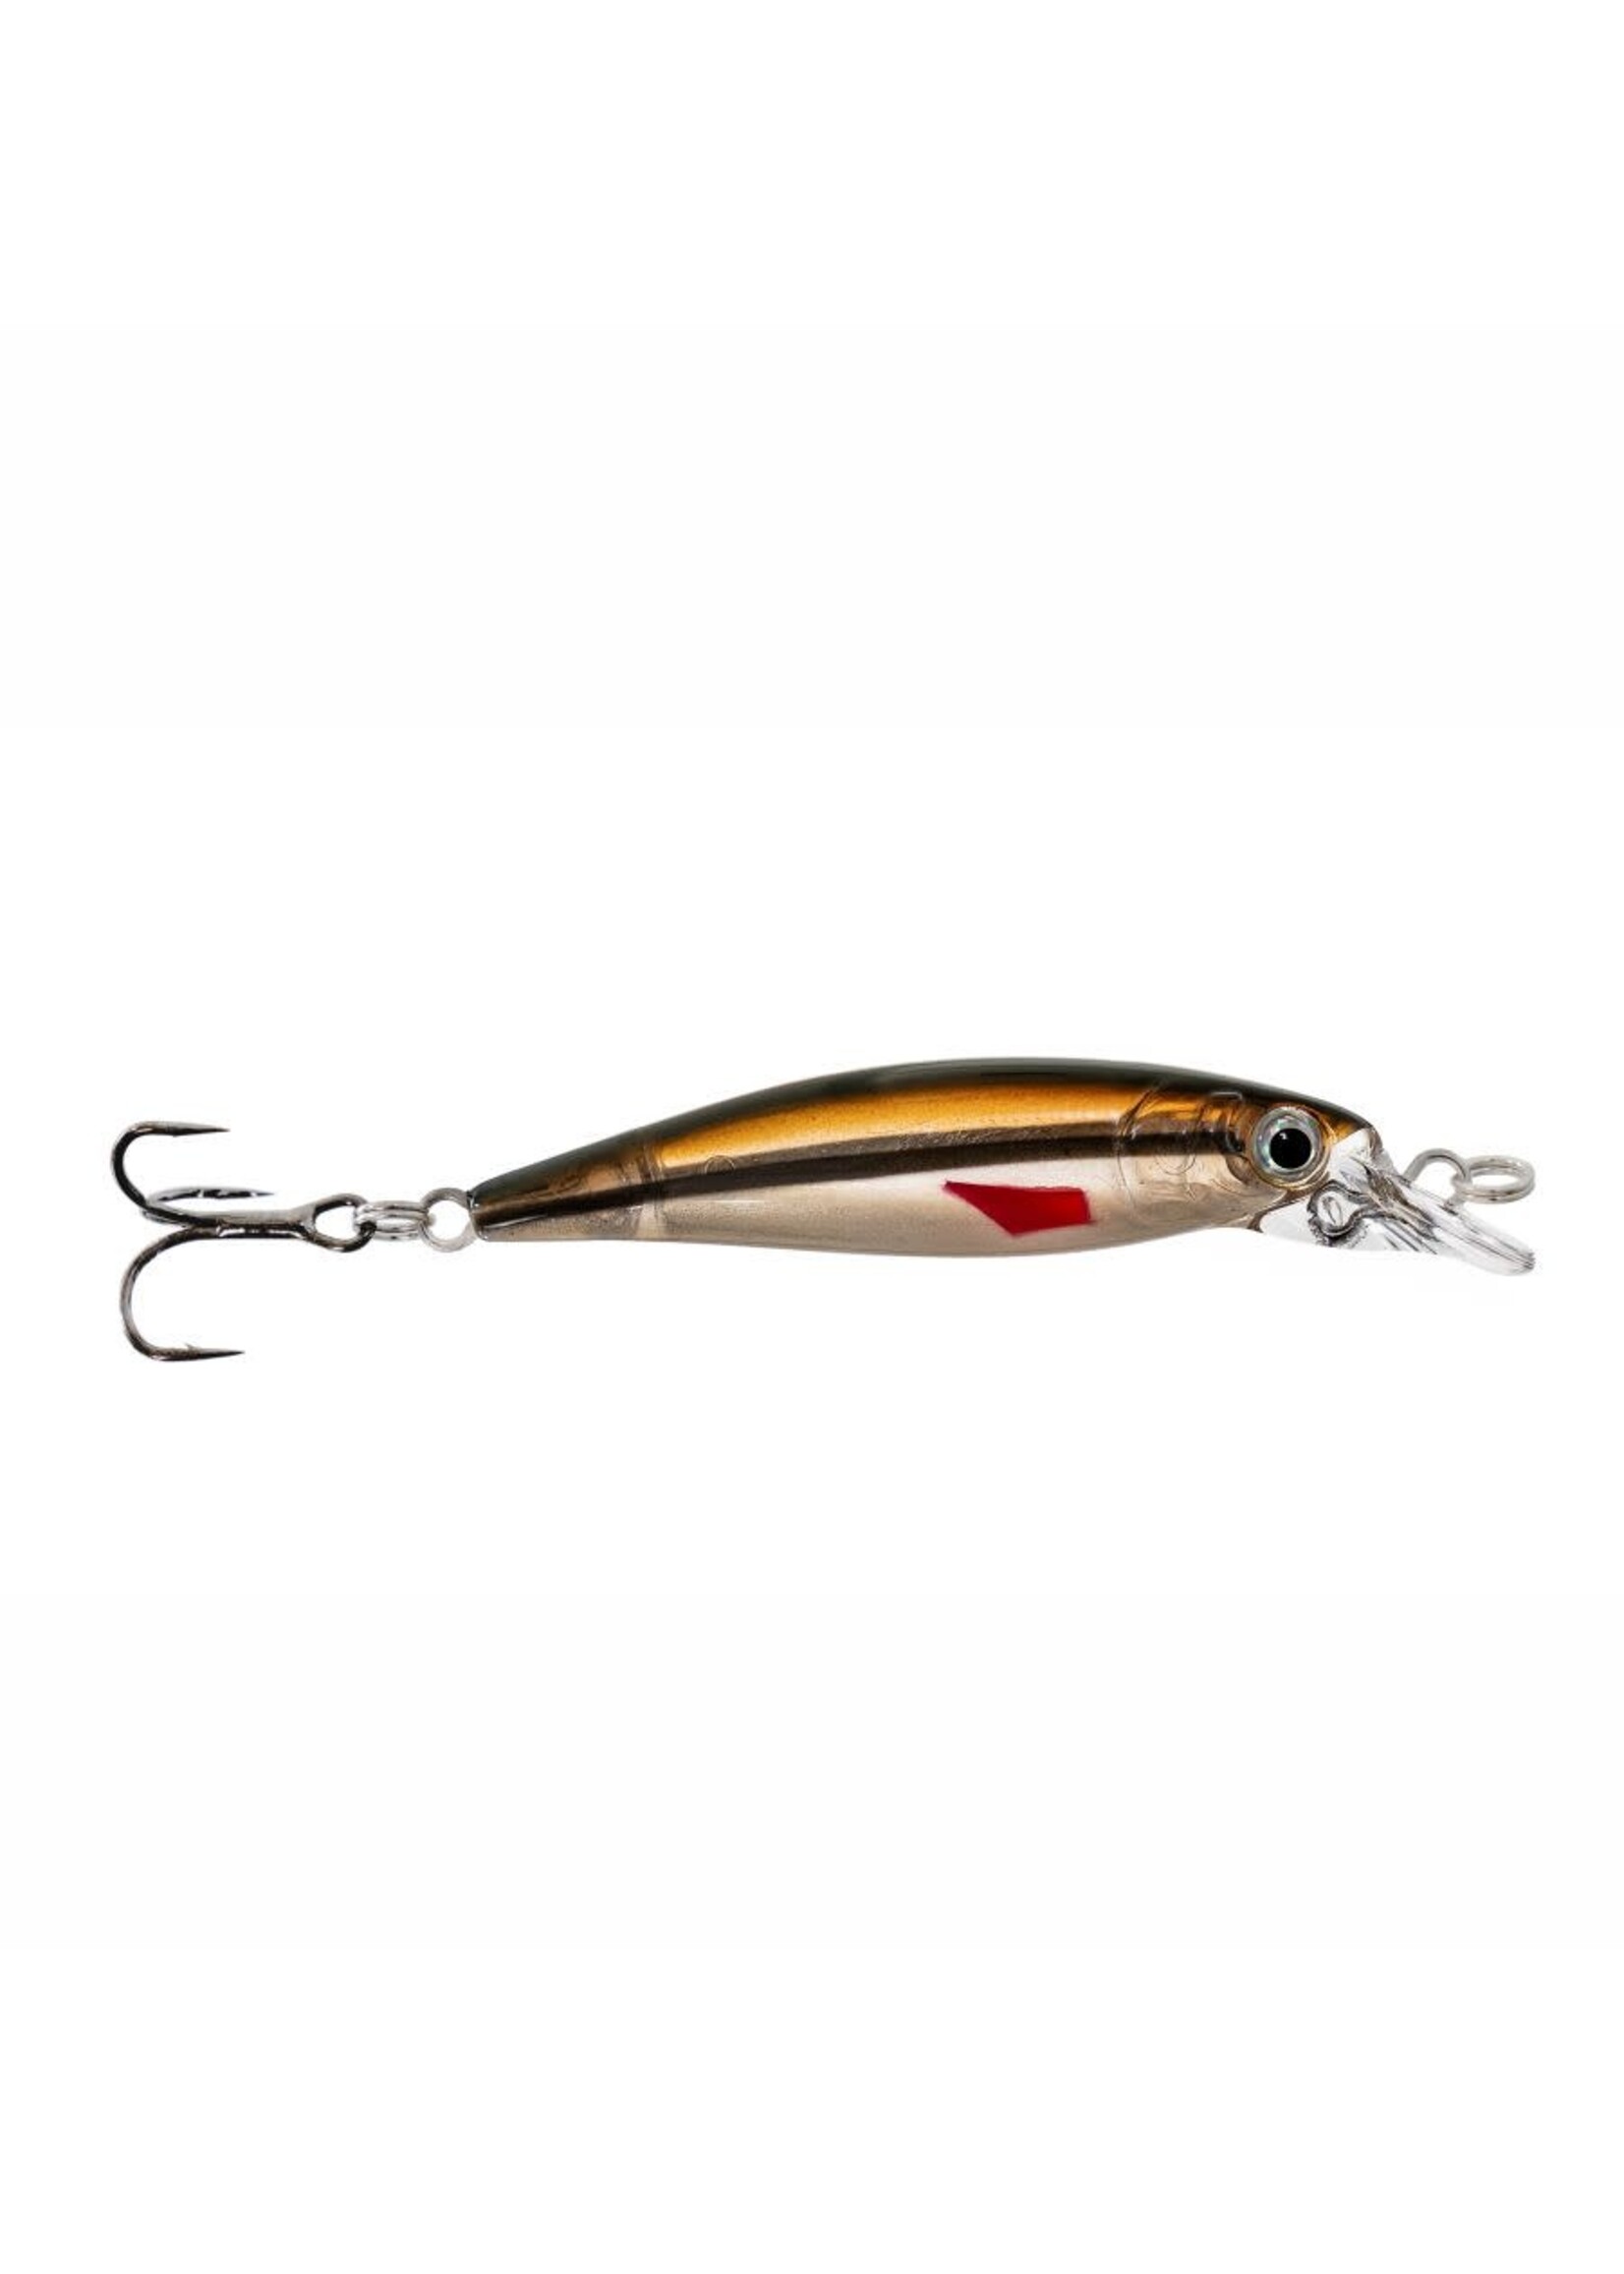 Blog Archives - Kens Offshore Fishing Lures & Tackle